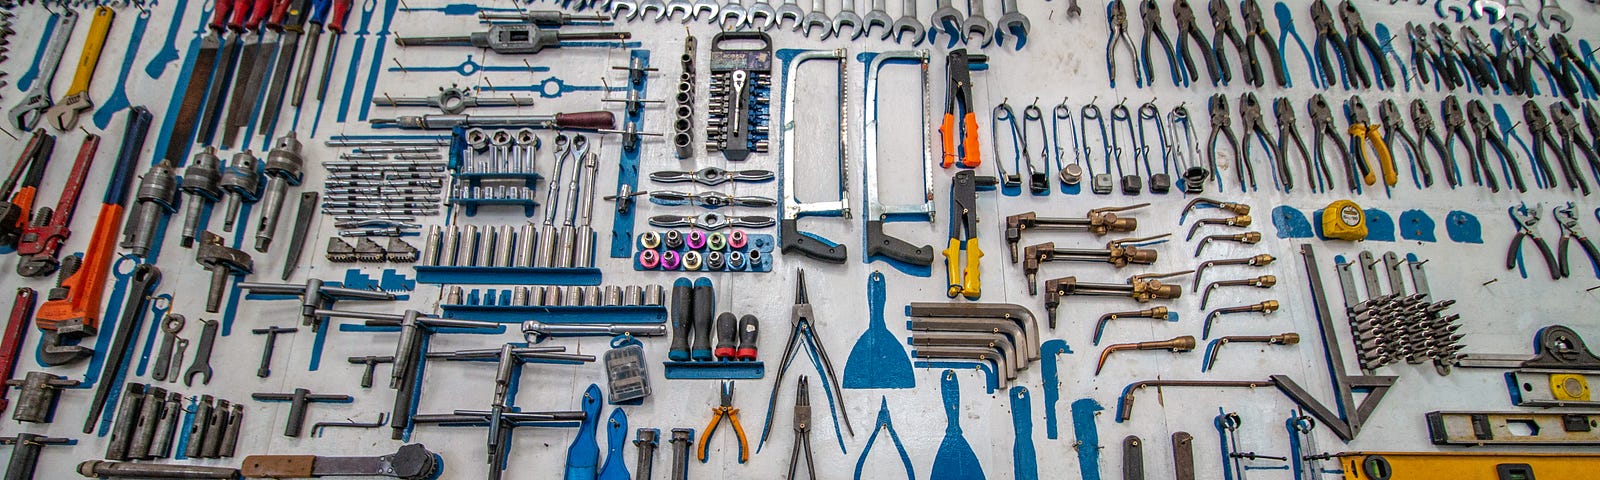 A bunch of sorted tools